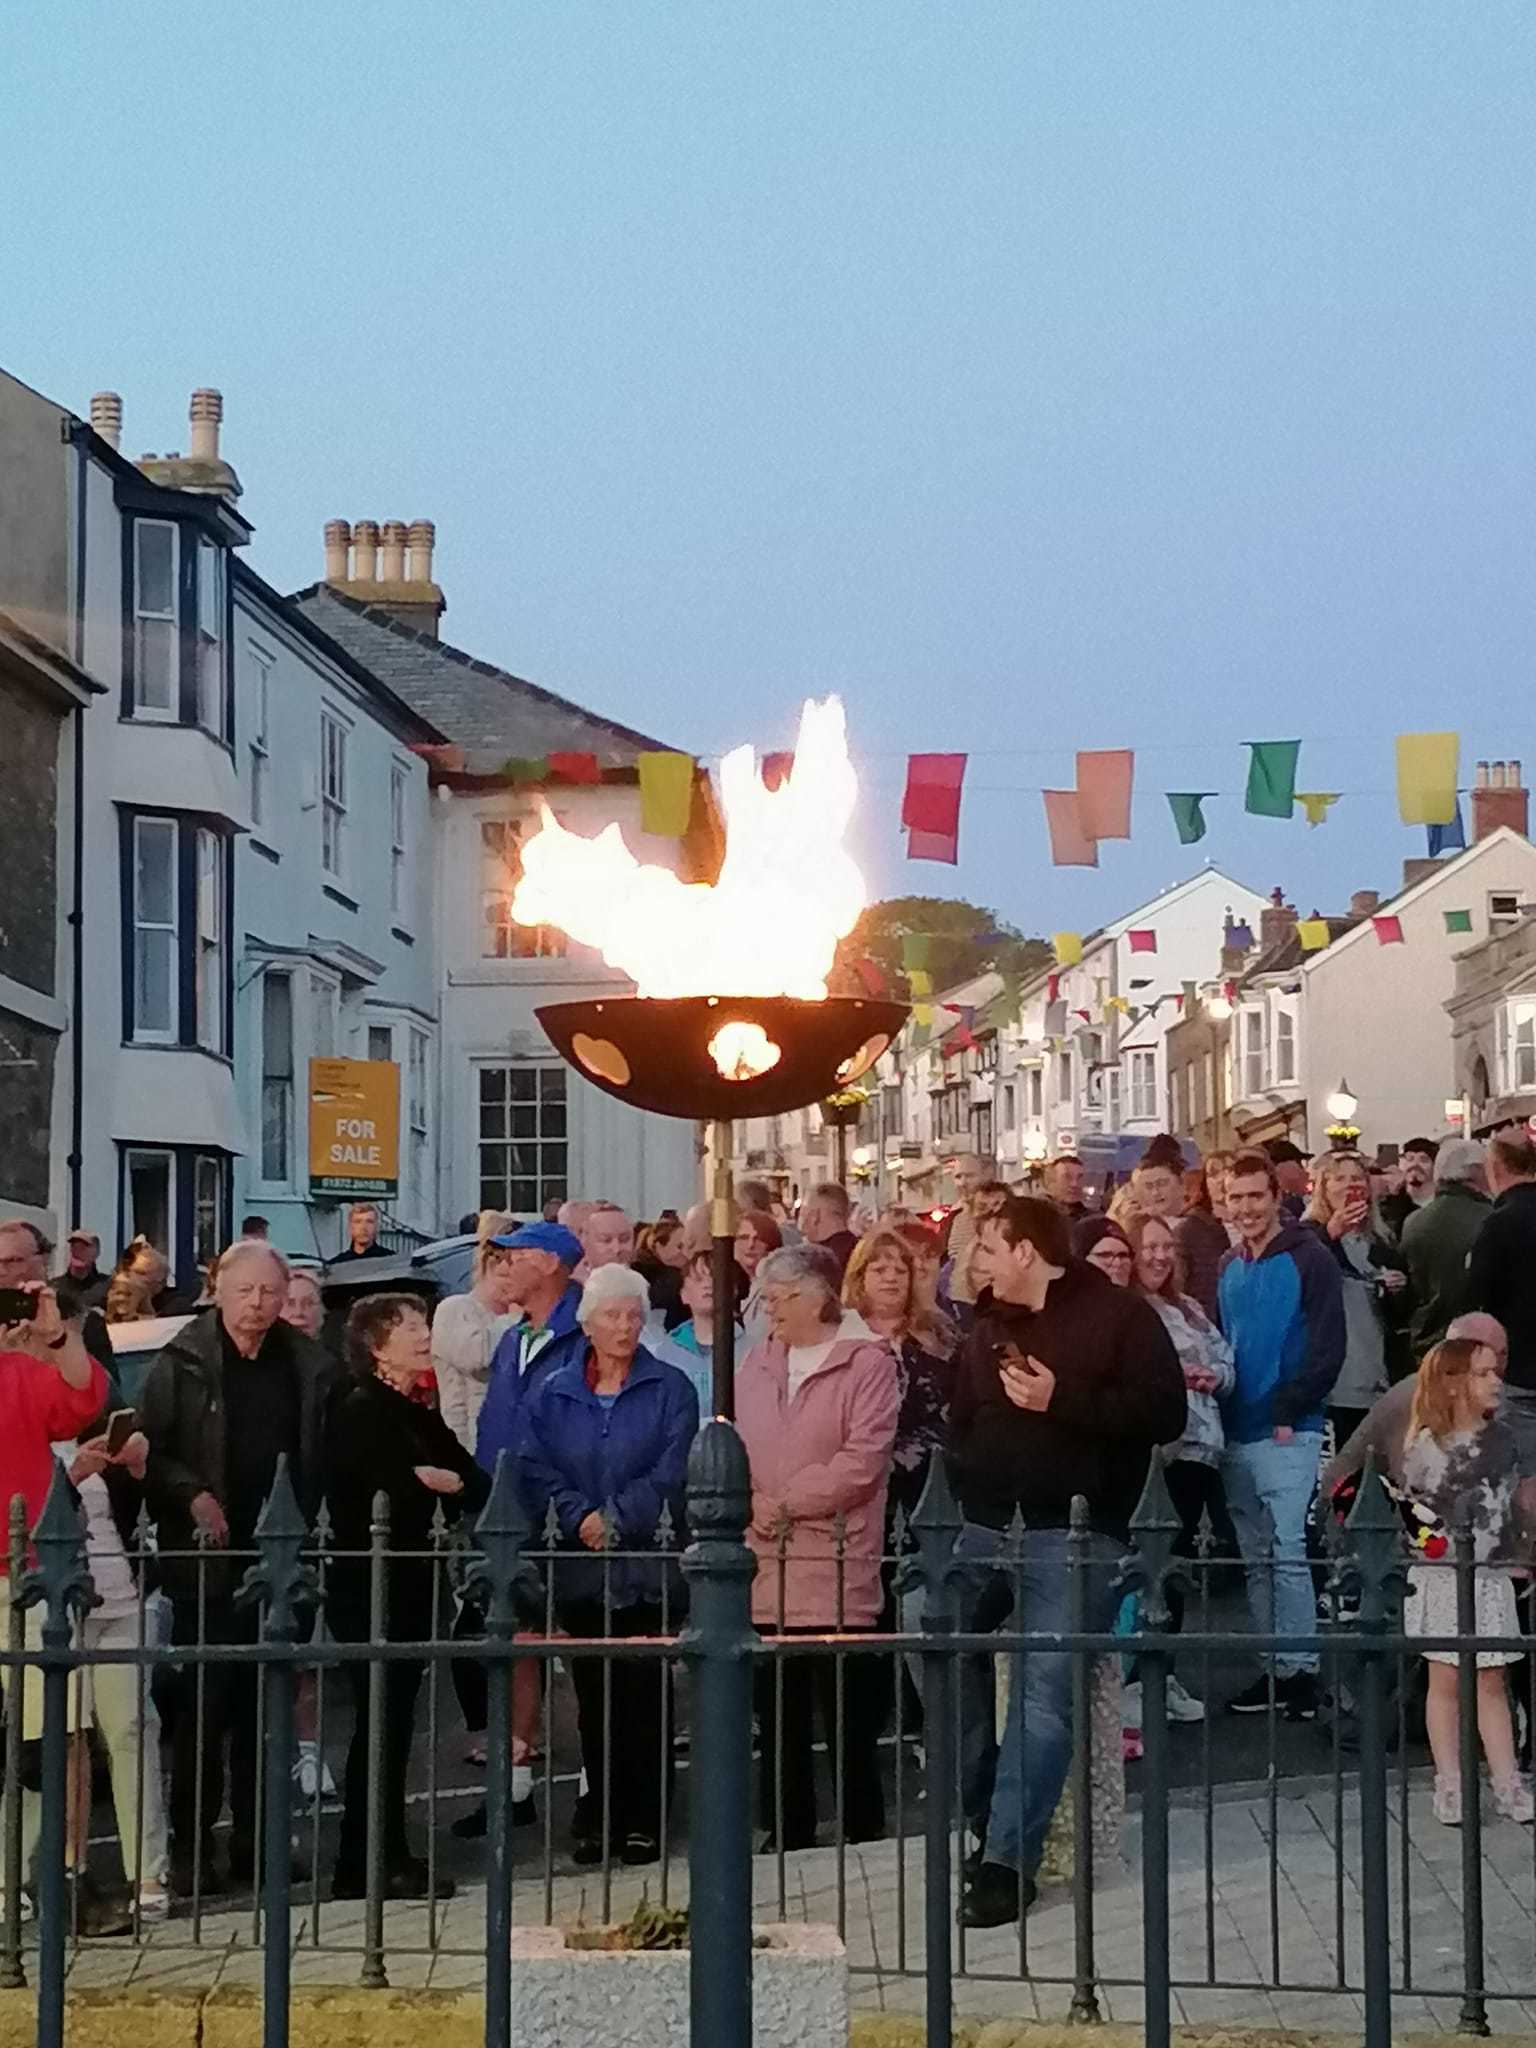 A good crowd of people turned out for the Helston beacon lighting Picture: Gemma Strong/Packet Camera Club